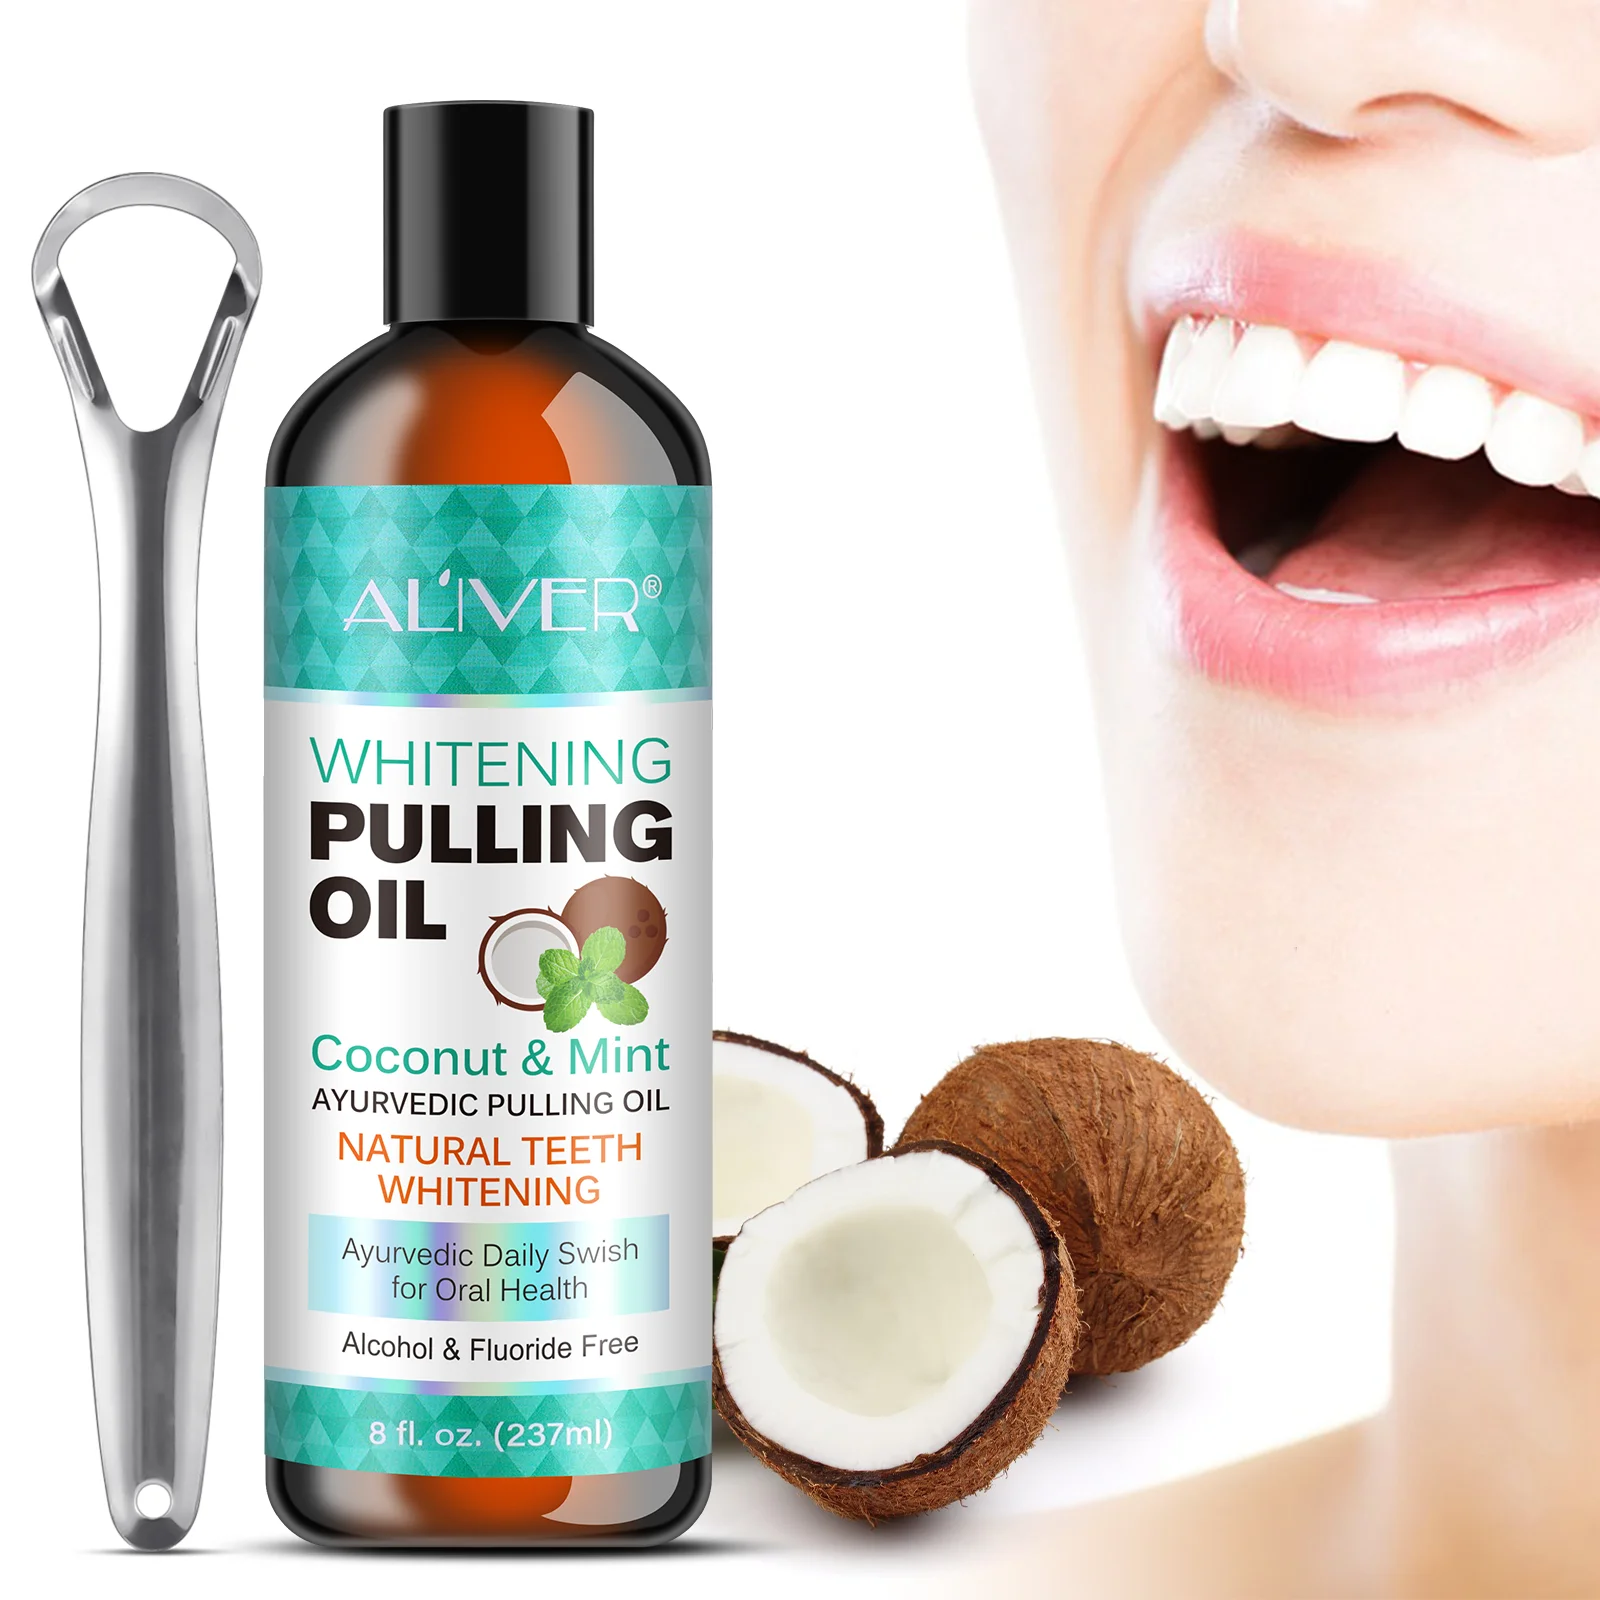 

ALIVER Organic Mouthwash Private Label Teeth Whitening Coconut Mint Pulling Oil With Tongue Scraper For Oral Health